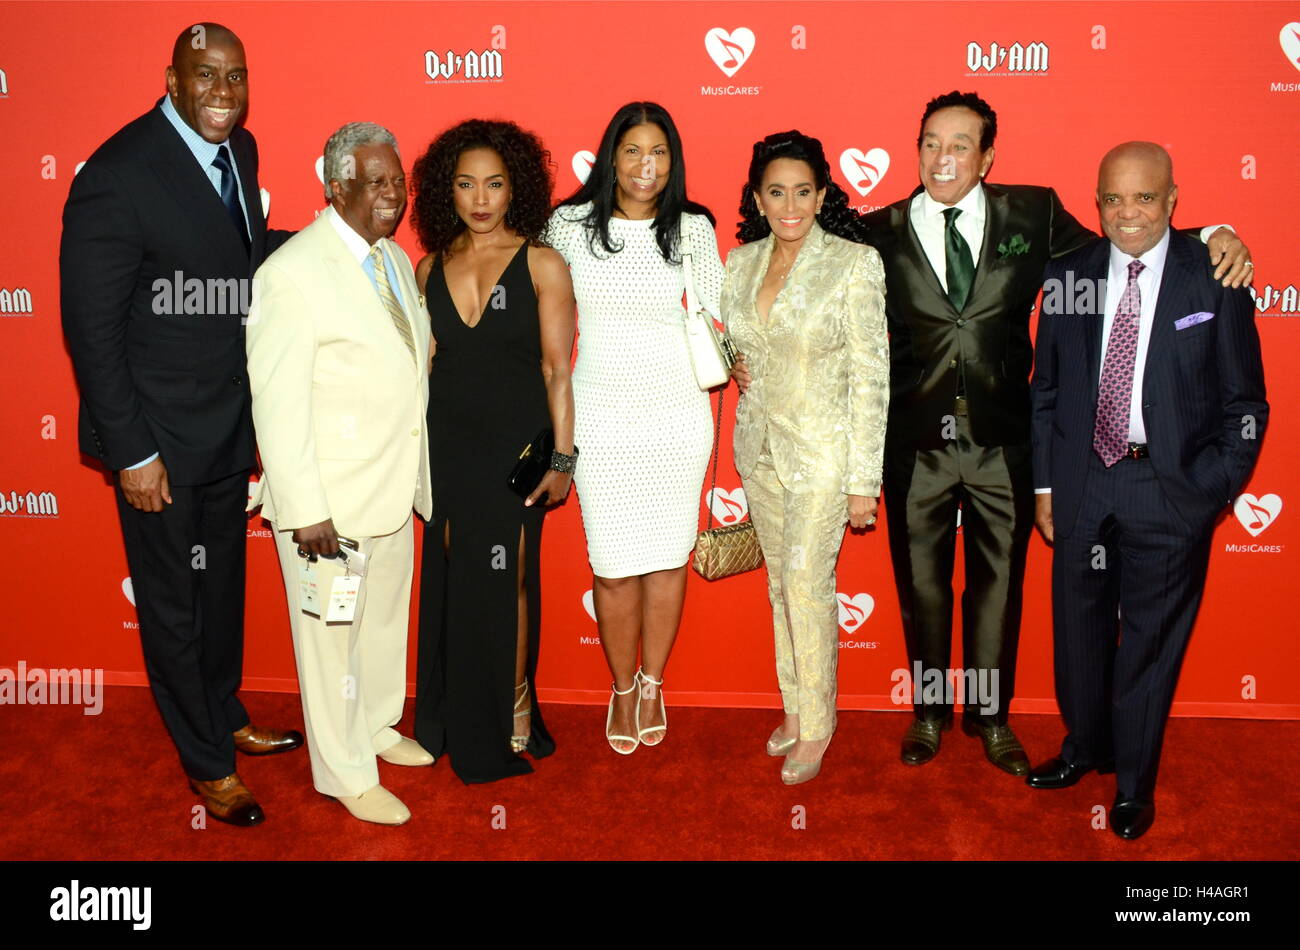 Magic Johnson, Angela Bassett, Earlitha Kelly, Frances Glandney, Smokey Robinson and Barry Gordy arrives for the 12th Annual MusiCares MAP Fund Tribute Concert at The Novo by Microsoft on May 19, 2016 in Los Angeles, California. Stock Photo